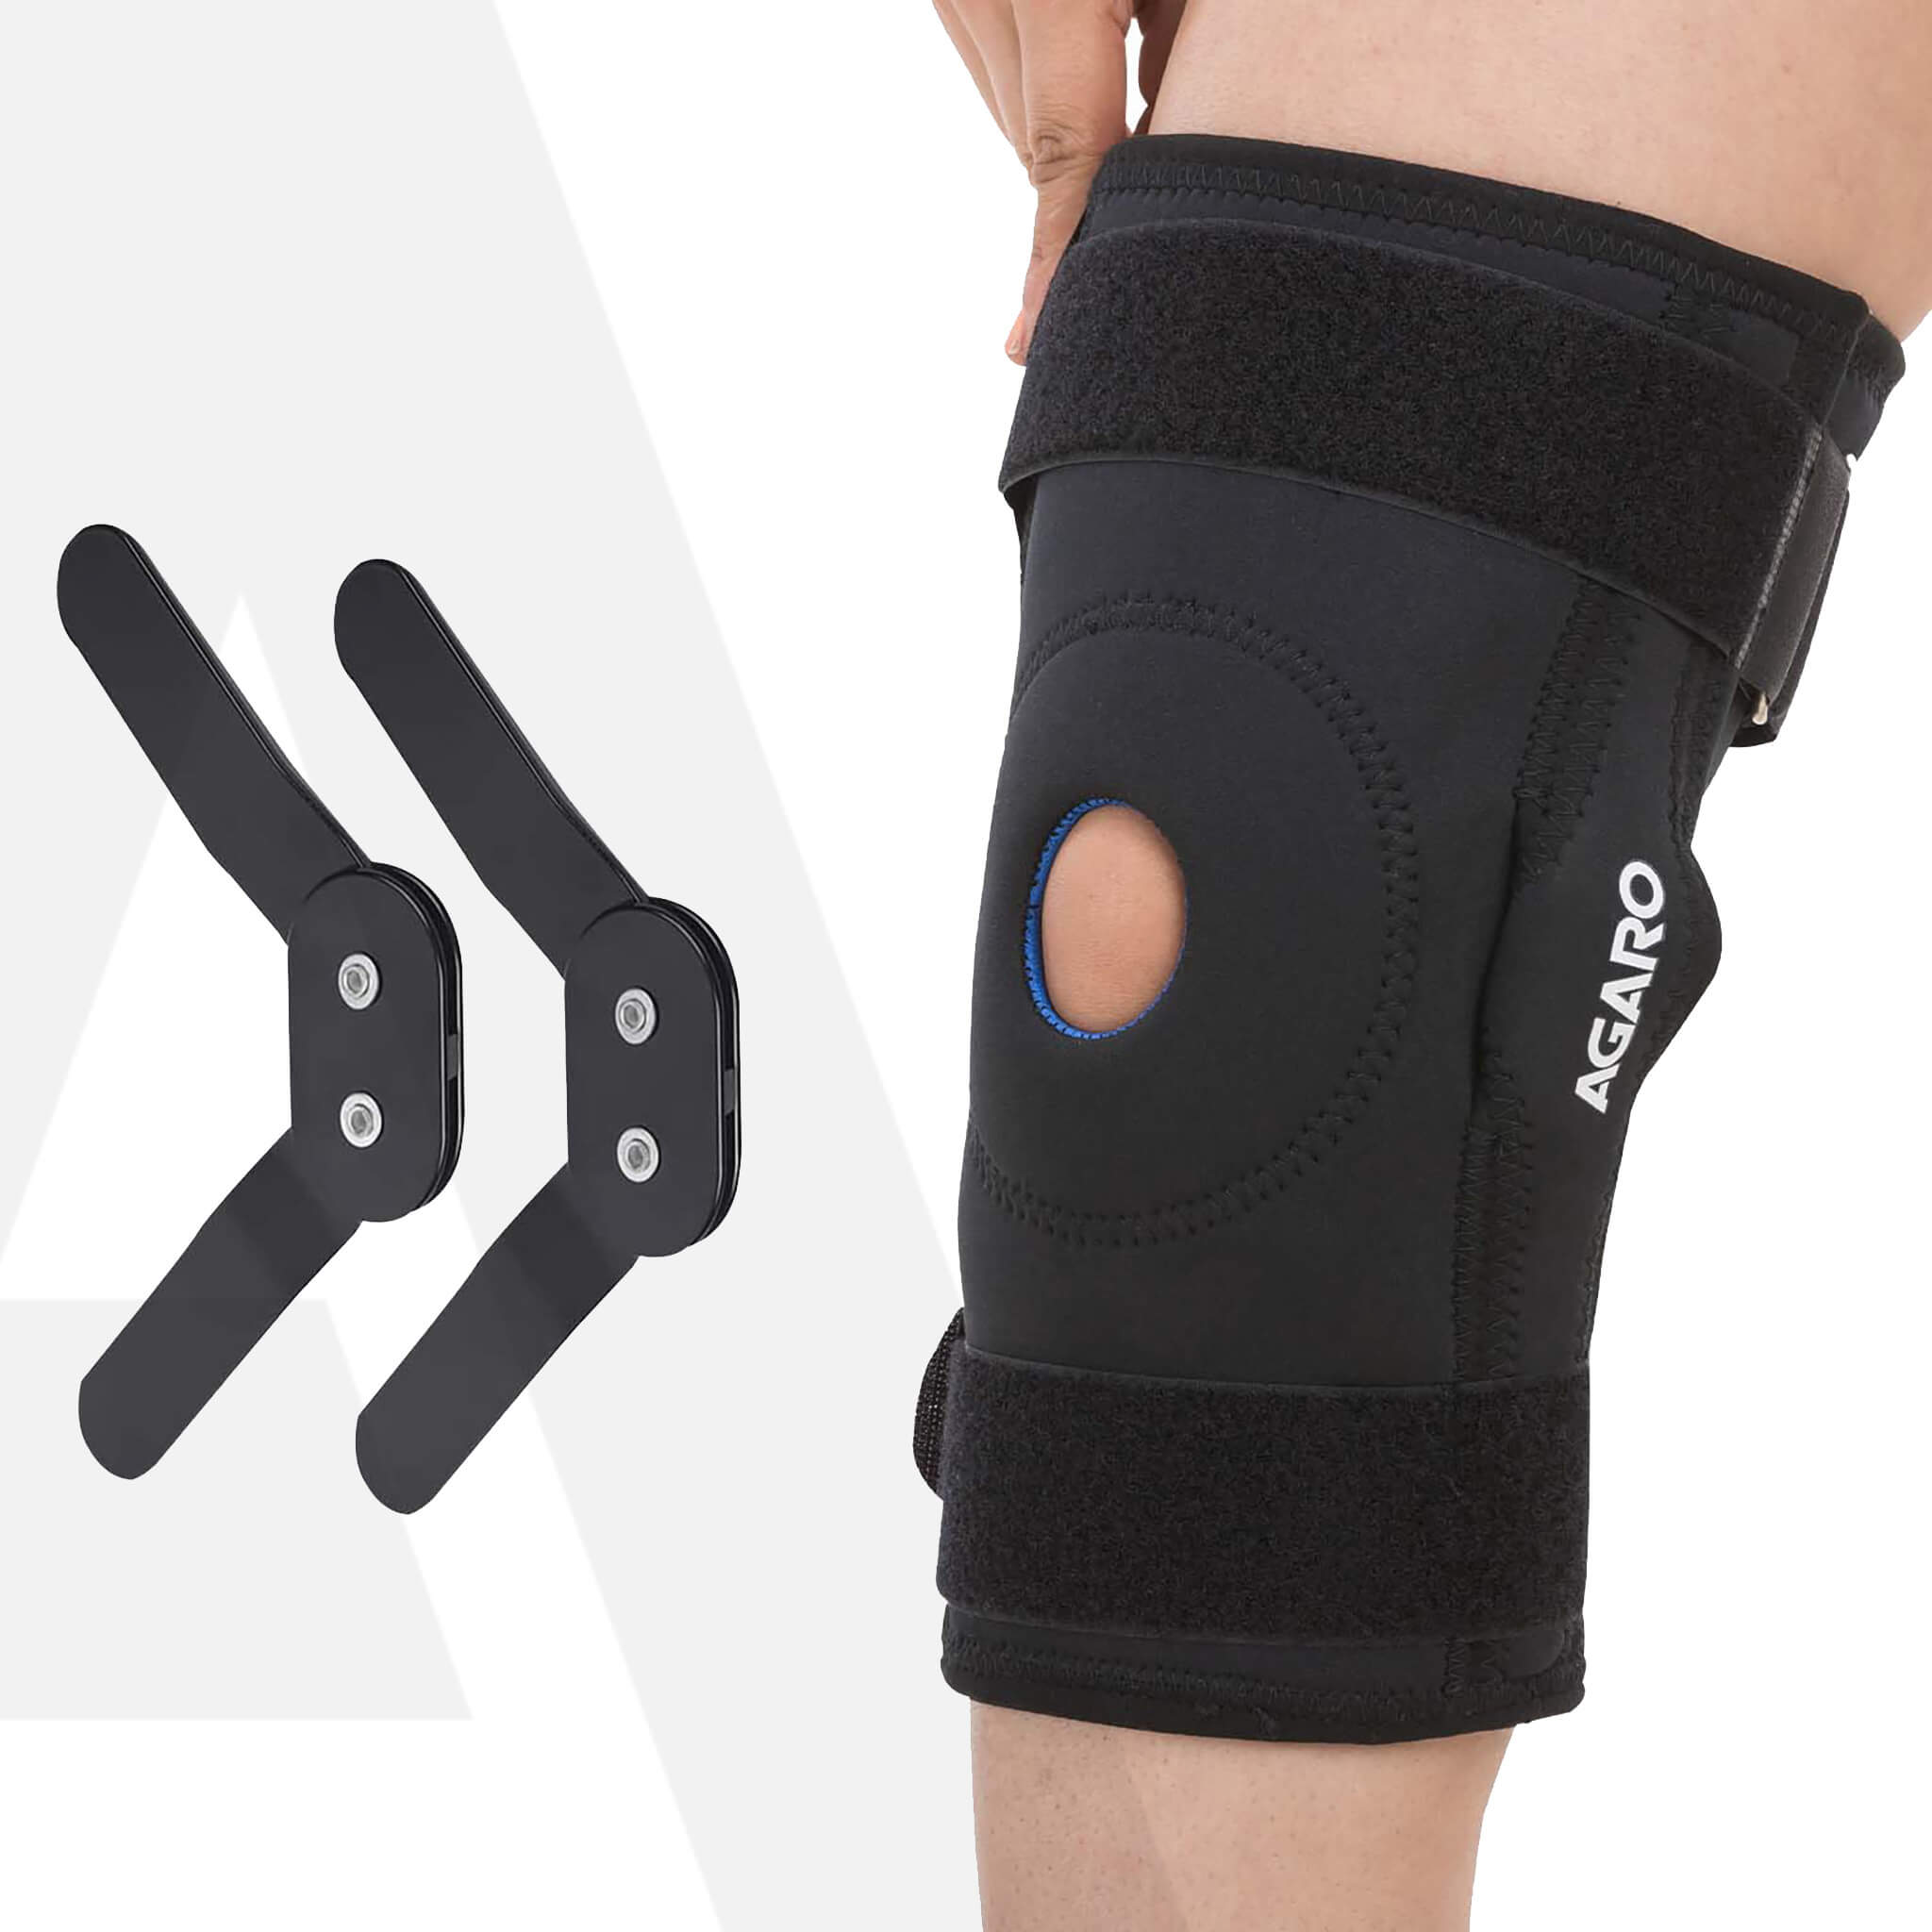 WRAPAROUND KNEE SUPPORT WITH BIAXIAL JOINTS AND